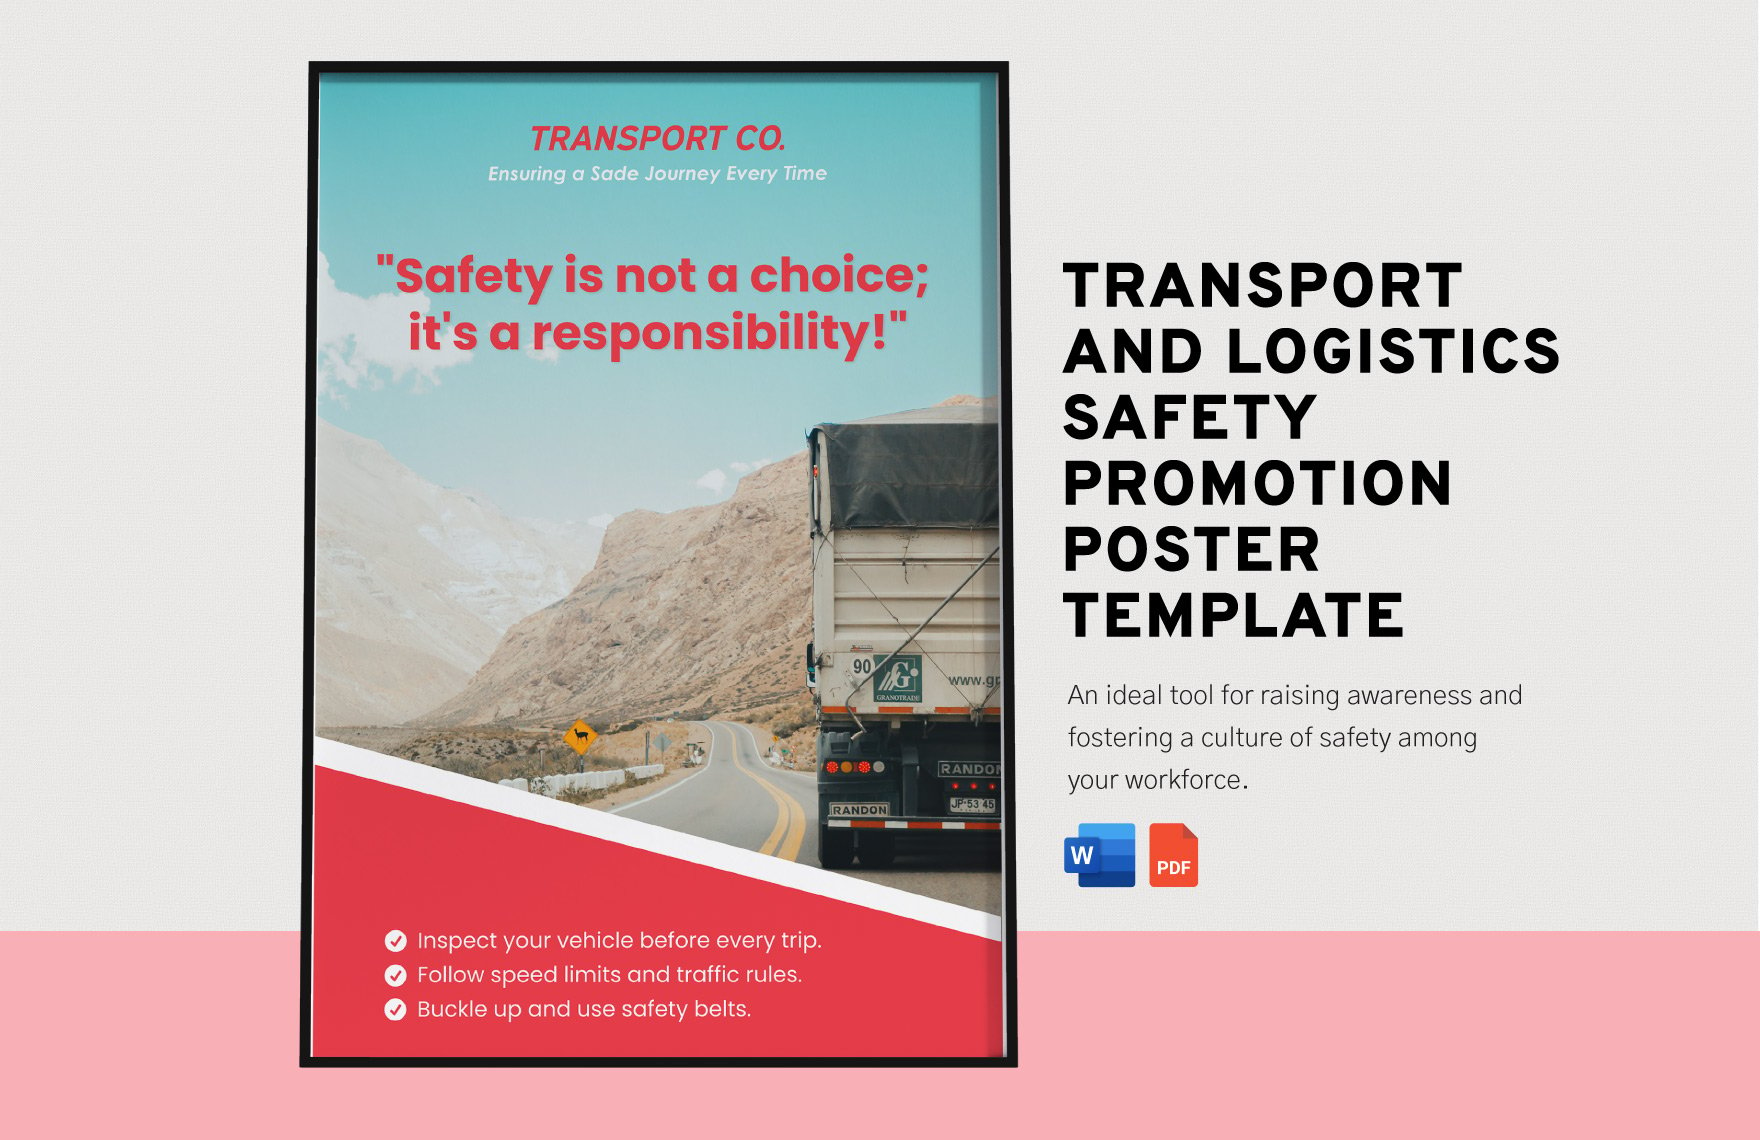 Transport and Logistics Safety Promotion Poster Template